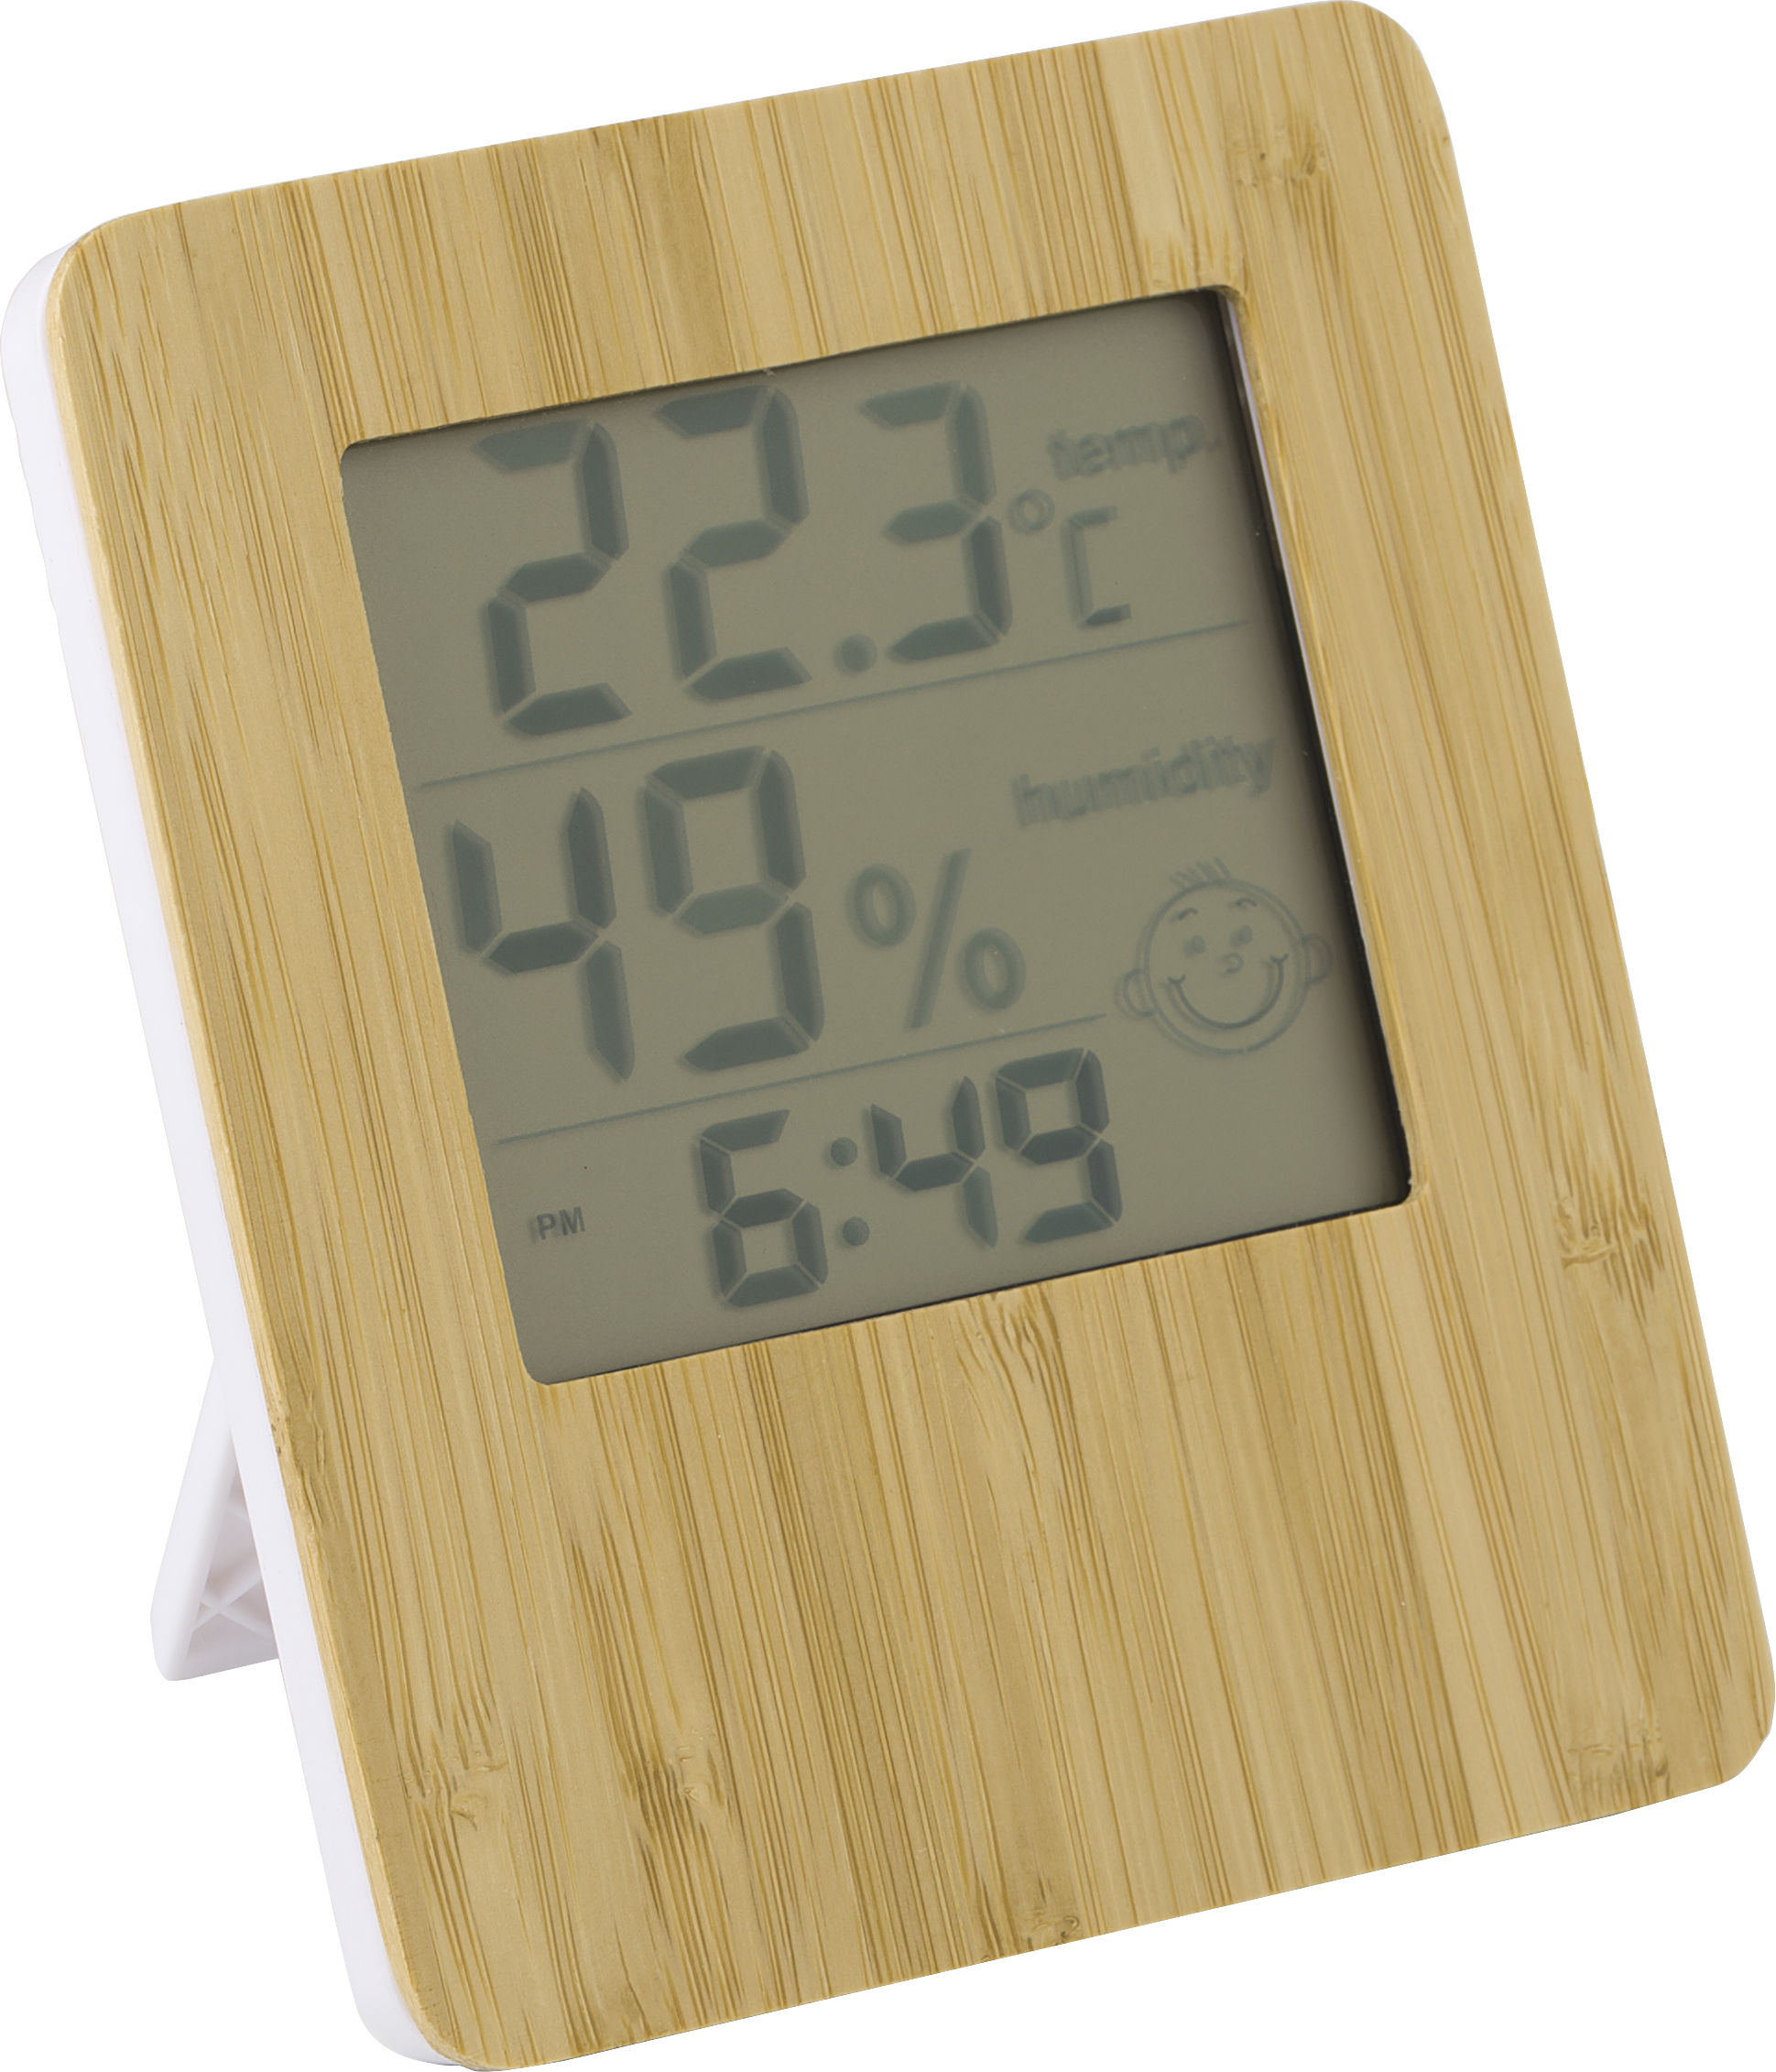 000000710951 823999999 3d135 lft pro01 2021 fal - Plastic Bamboo weather station